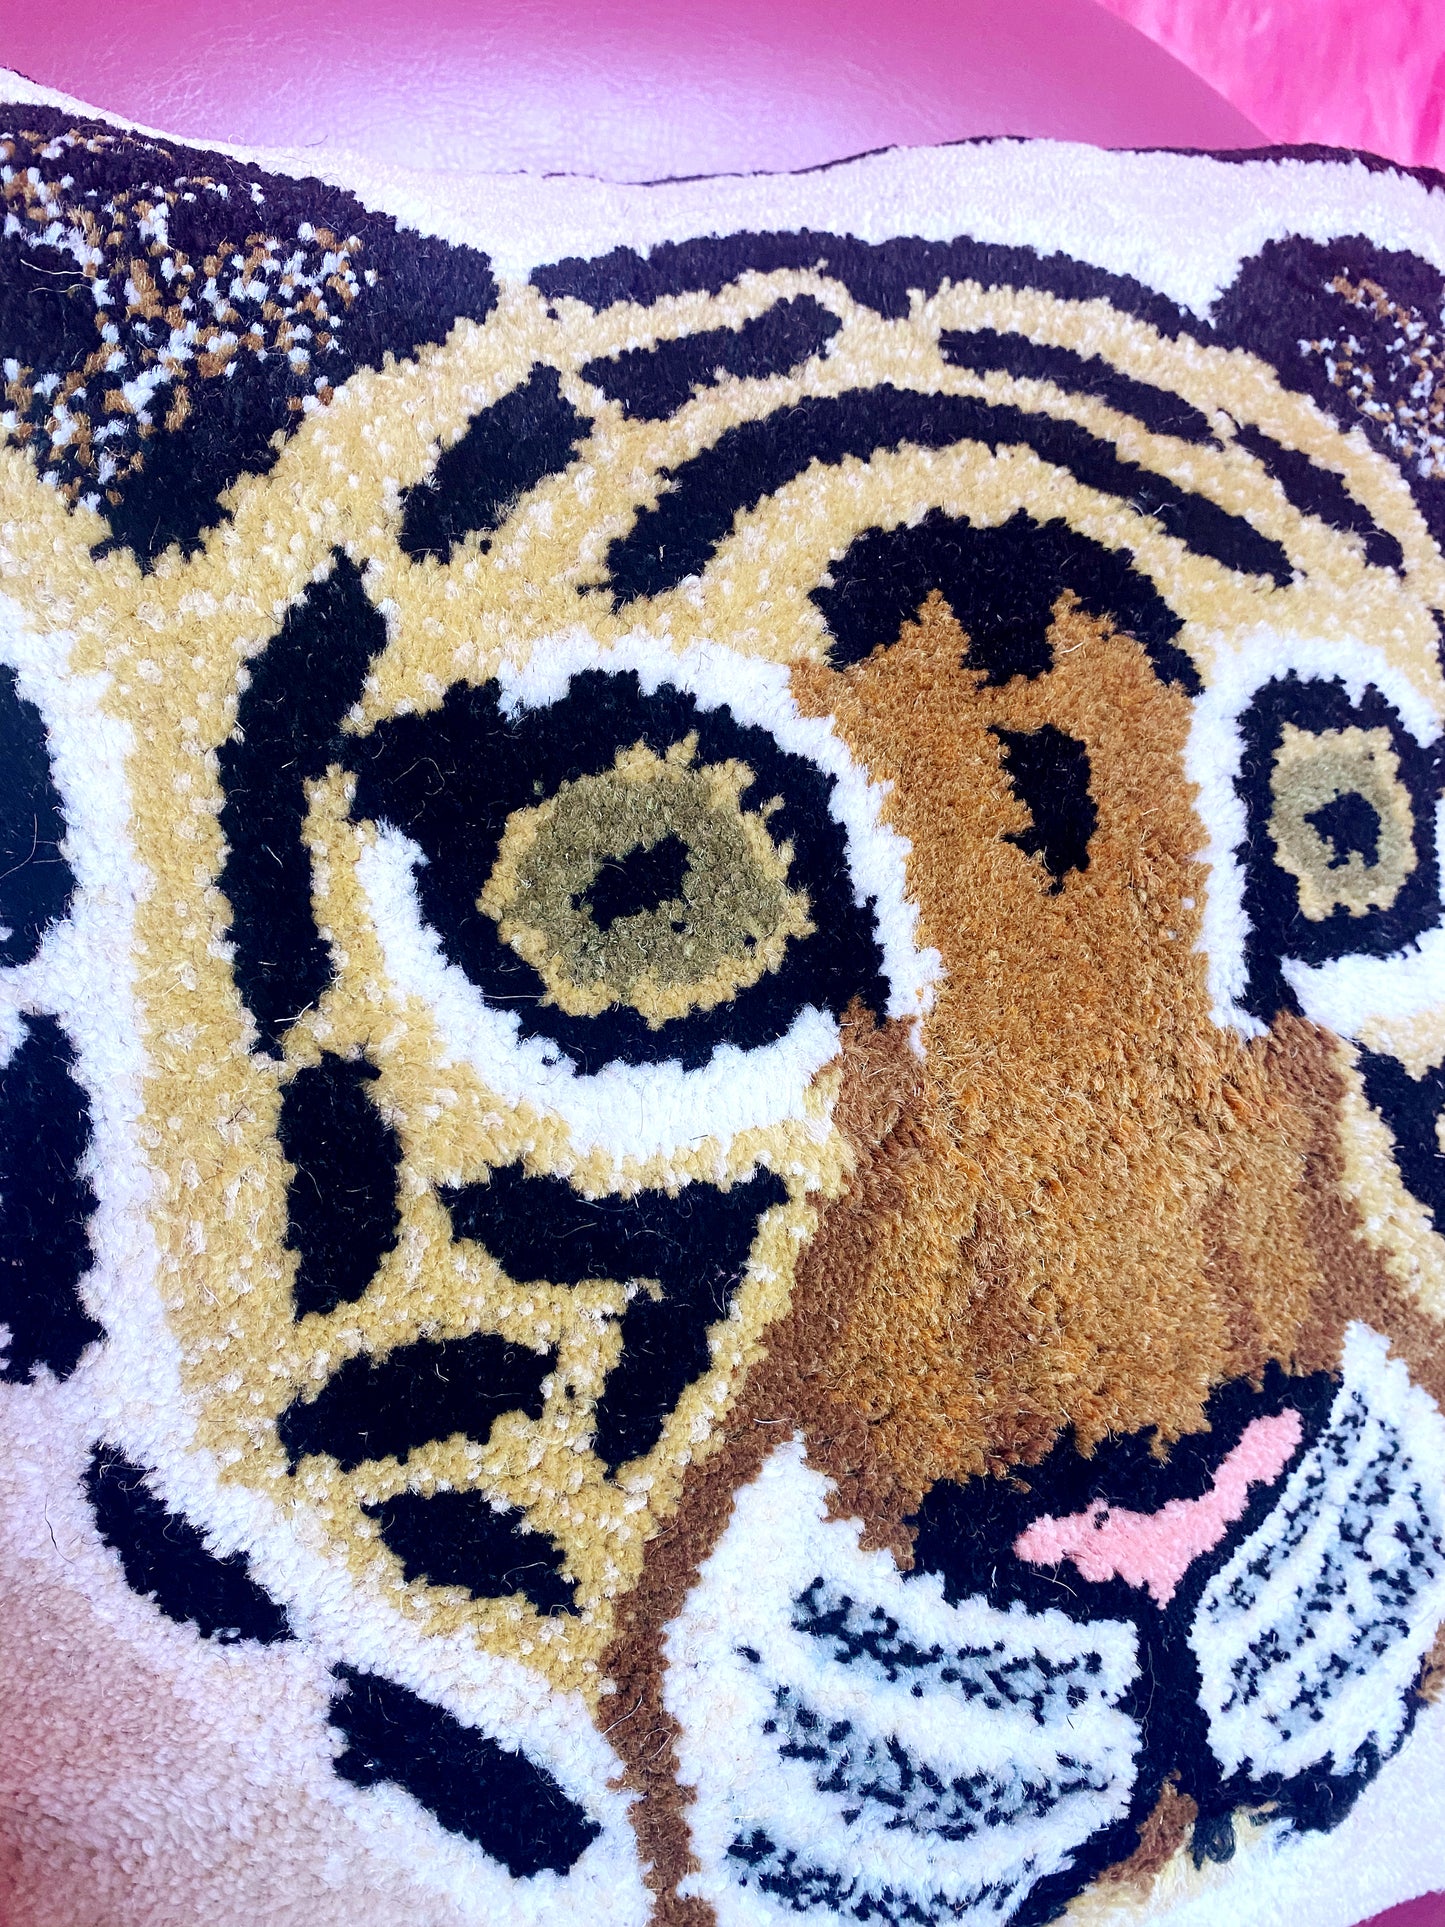 'Rugby' Large caramel Tiger Face Cushion